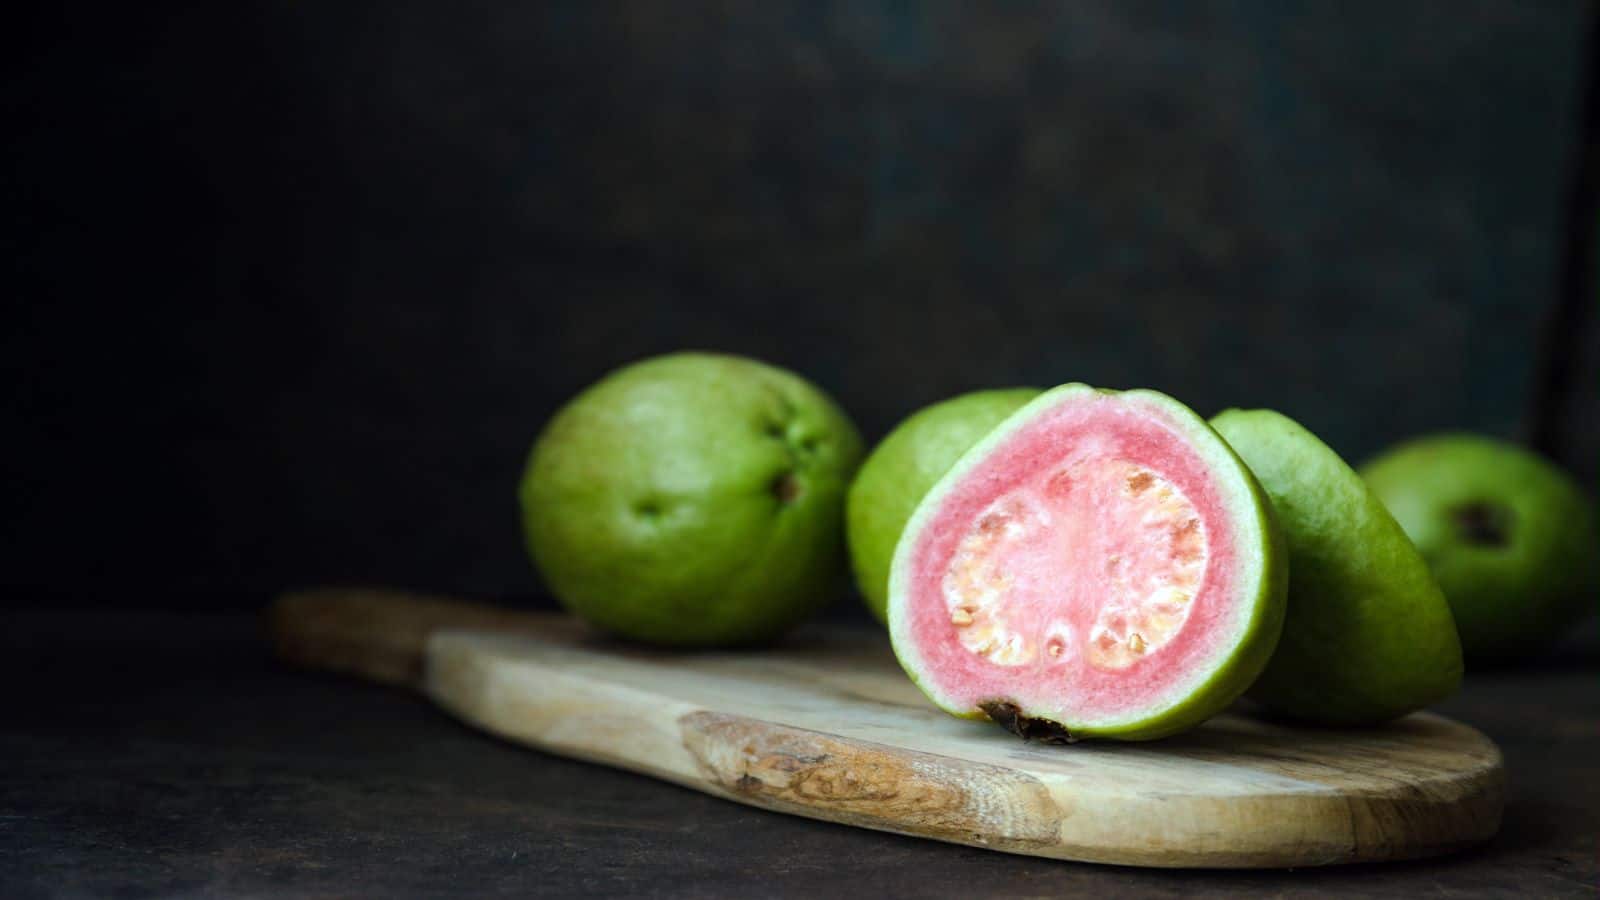 15 Healthy Benefits of Eating Guava Every Day